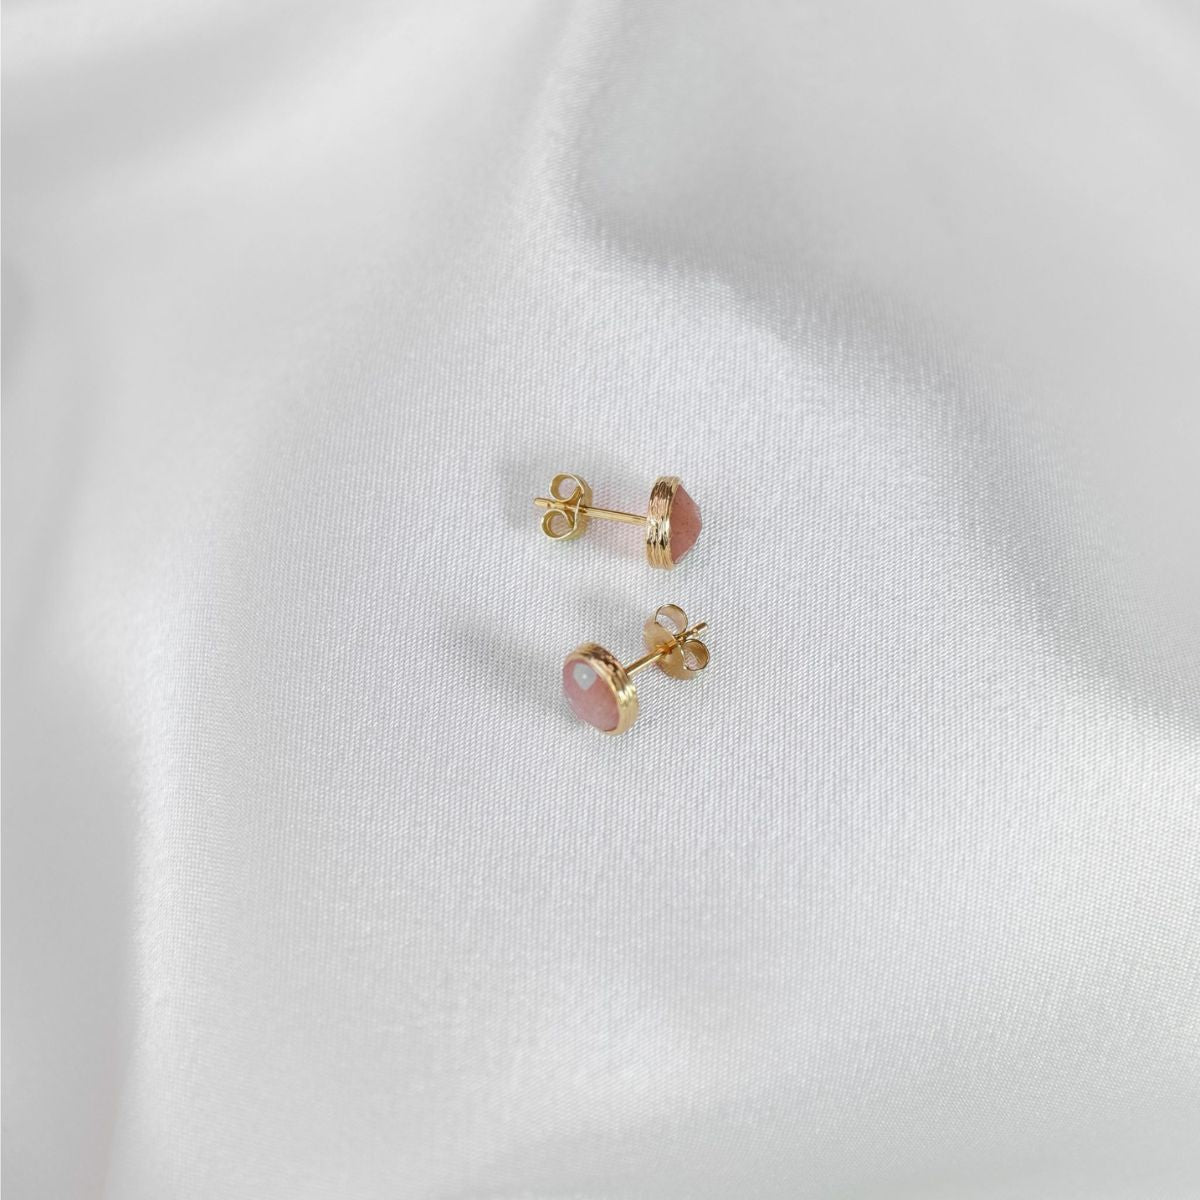 a pair of peach moonstone studs on a white cloth